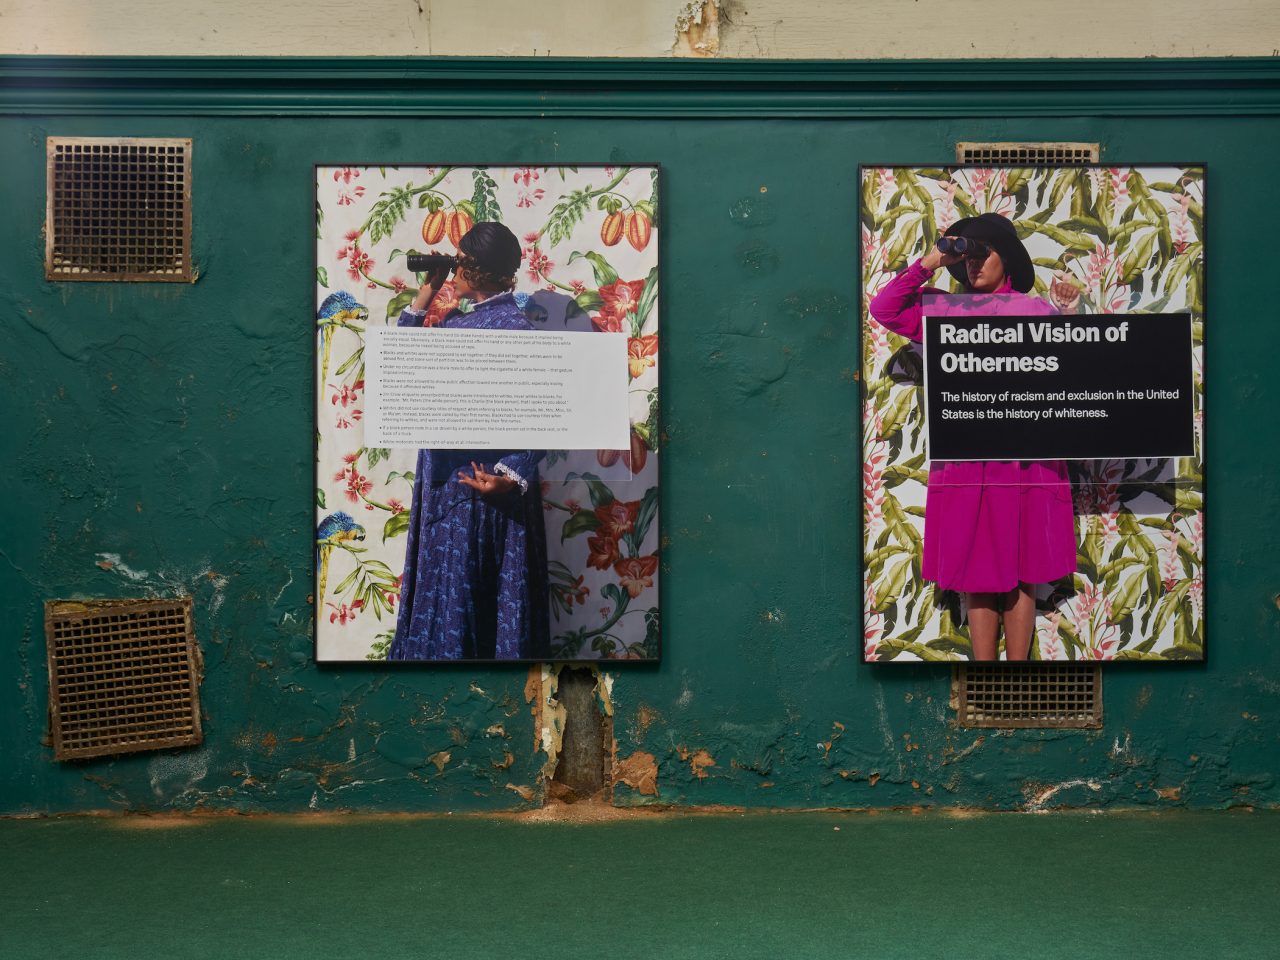 Two large flat artworks on the walls of Cotton Exchange, the artworks have flowery assets to them, both with women looking through binoculars and blacks of text infront of them. The text eligible reads 'Radical Vision of Otherness'. The space had dark green walls and a green carpet.